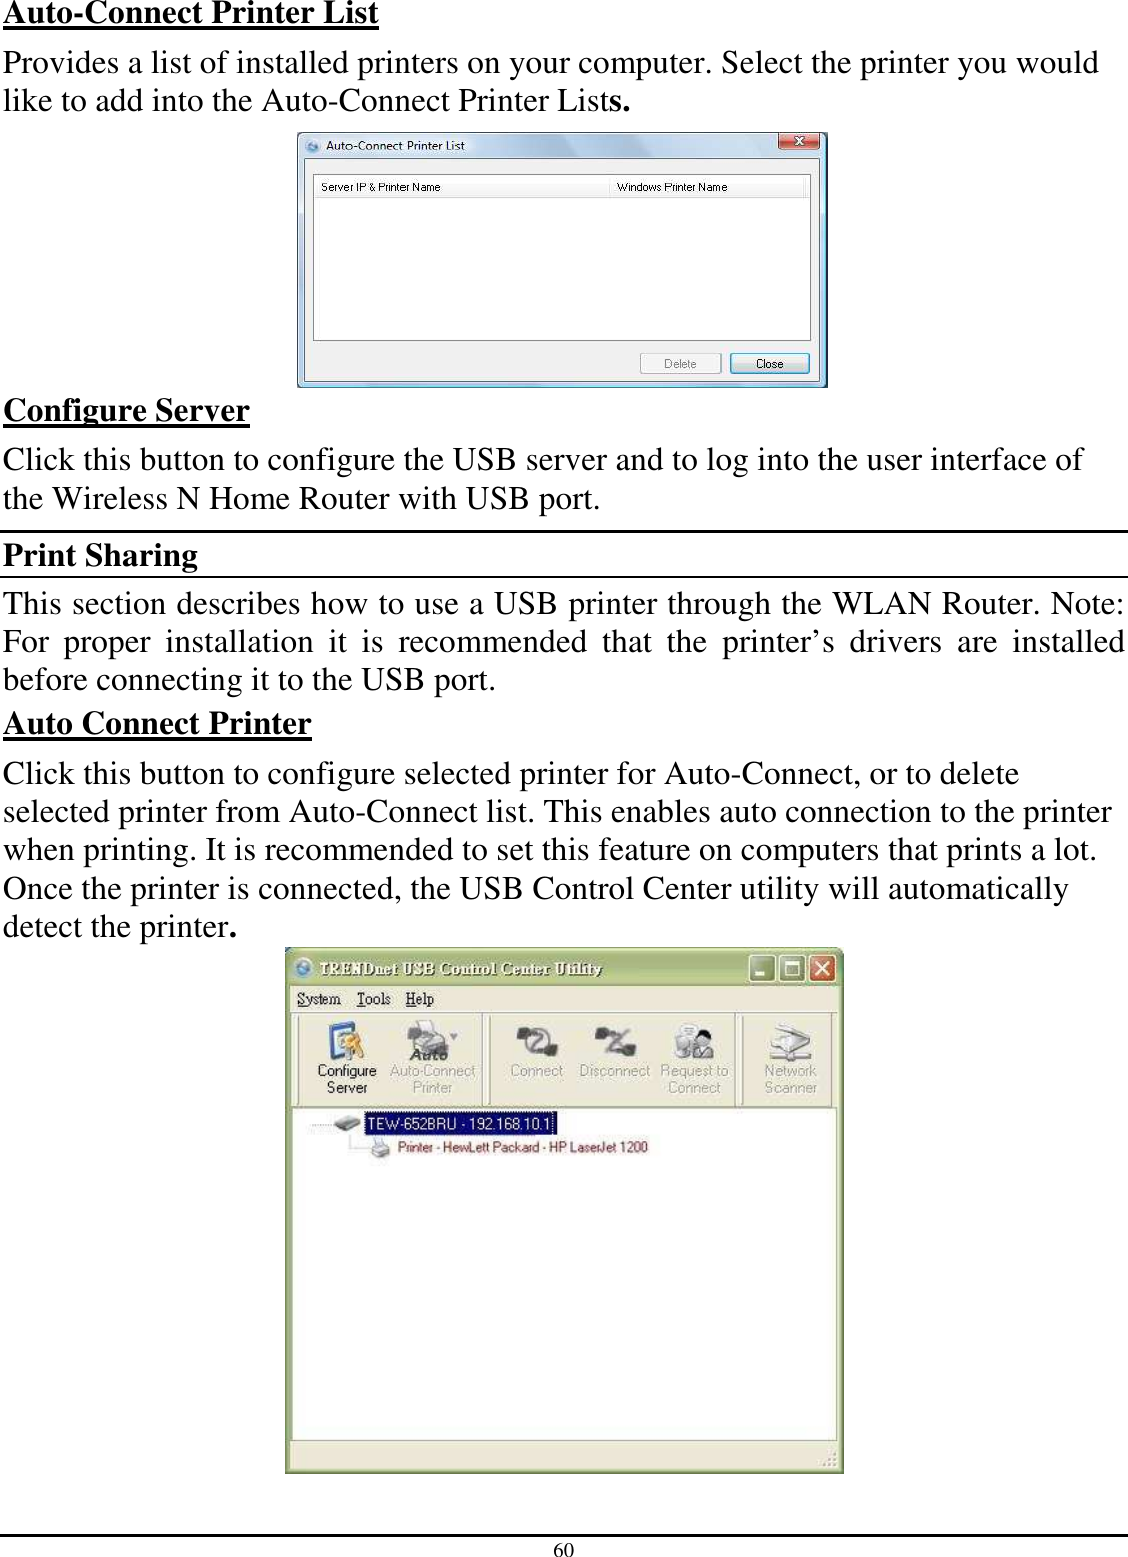 60 Auto-Connect Printer List Provides a list of installed printers on your computer. Select the printer you would like to add into the Auto-Connect Printer Lists.   Configure Server Click this button to configure the USB server and to log into the user interface of the Wireless N Home Router with USB port. Print Sharing  This section describes how to use a USB printer through the WLAN Router. Note: For  proper  installation  it  is  recommended  that  the  printer’s  drivers  are  installed before connecting it to the USB port. Auto Connect Printer  Click this button to configure selected printer for Auto-Connect, or to delete selected printer from Auto-Connect list. This enables auto connection to the printer when printing. It is recommended to set this feature on computers that prints a lot.  Once the printer is connected, the USB Control Center utility will automatically detect the printer.   